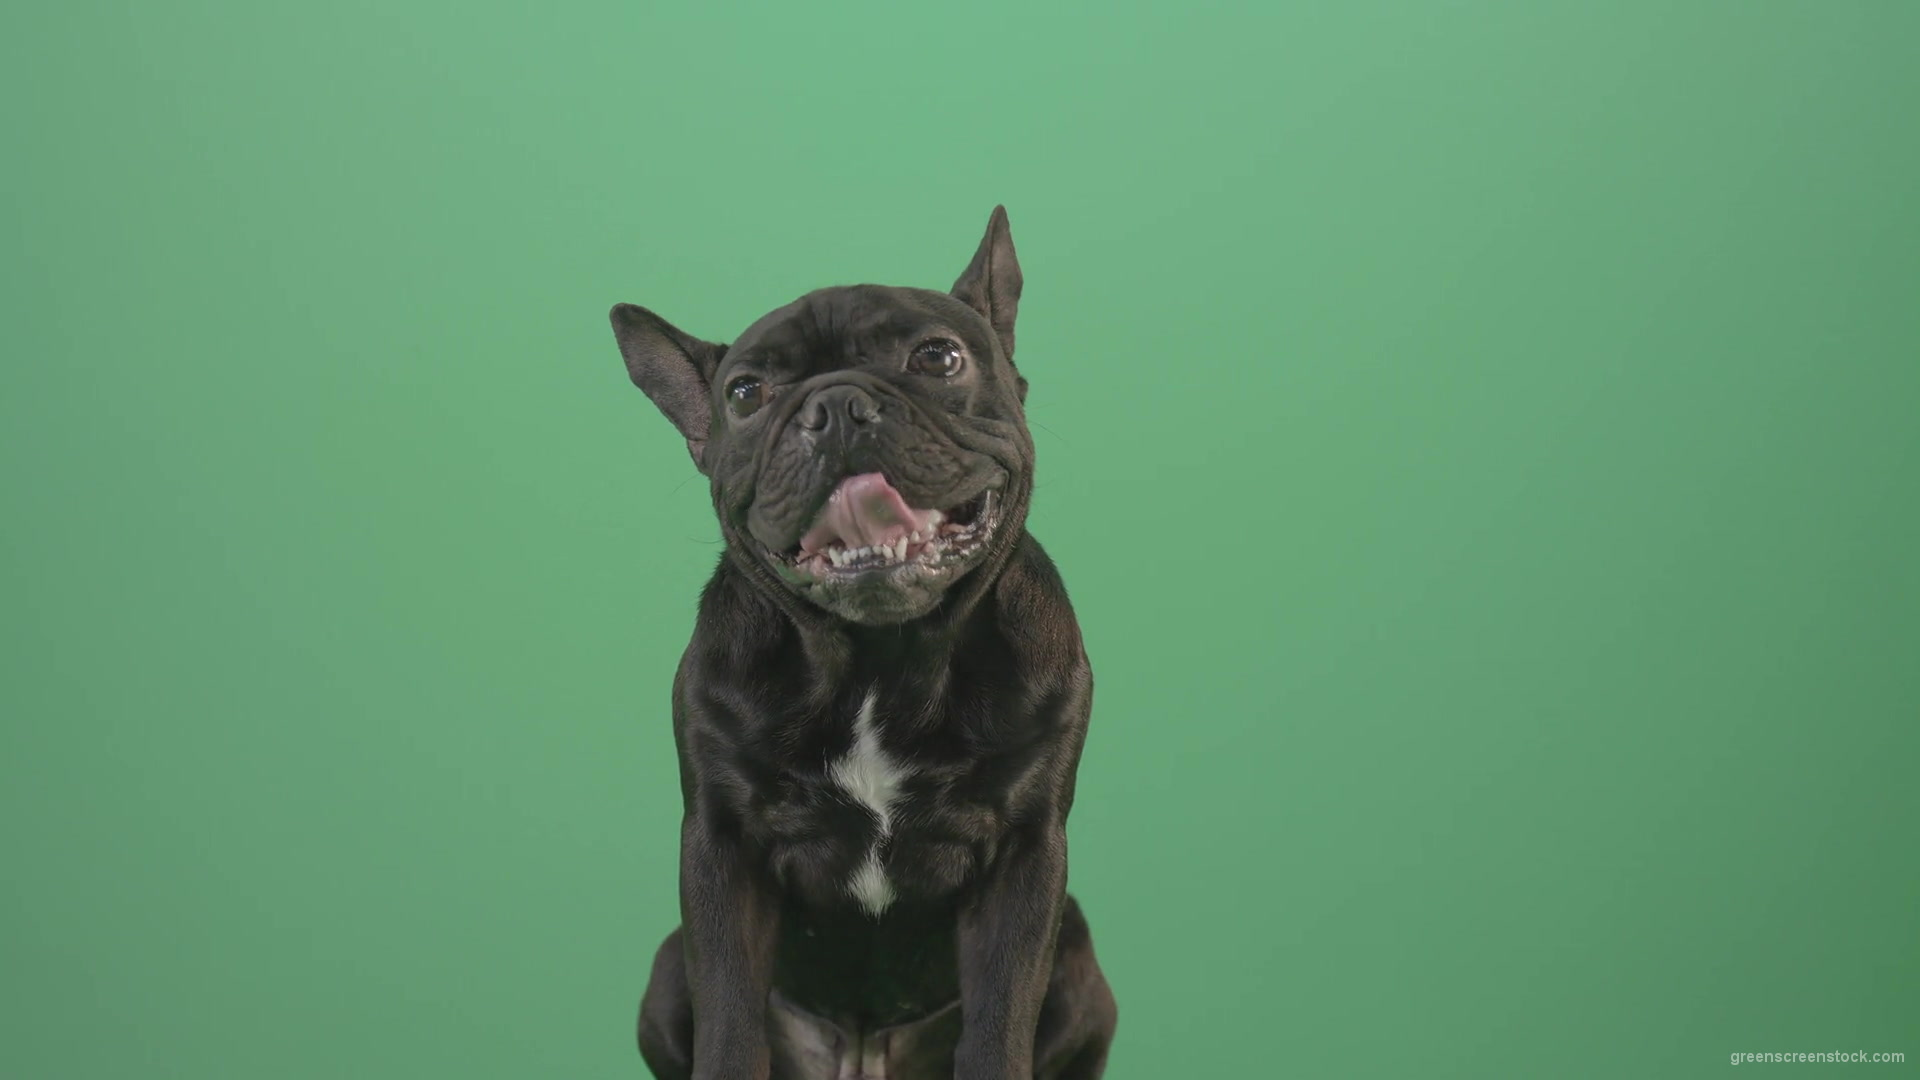 Hard-breathing-french-black-bull-dog-over-green-screen-4K-Video-Footage-1920_005 Green Screen Stock